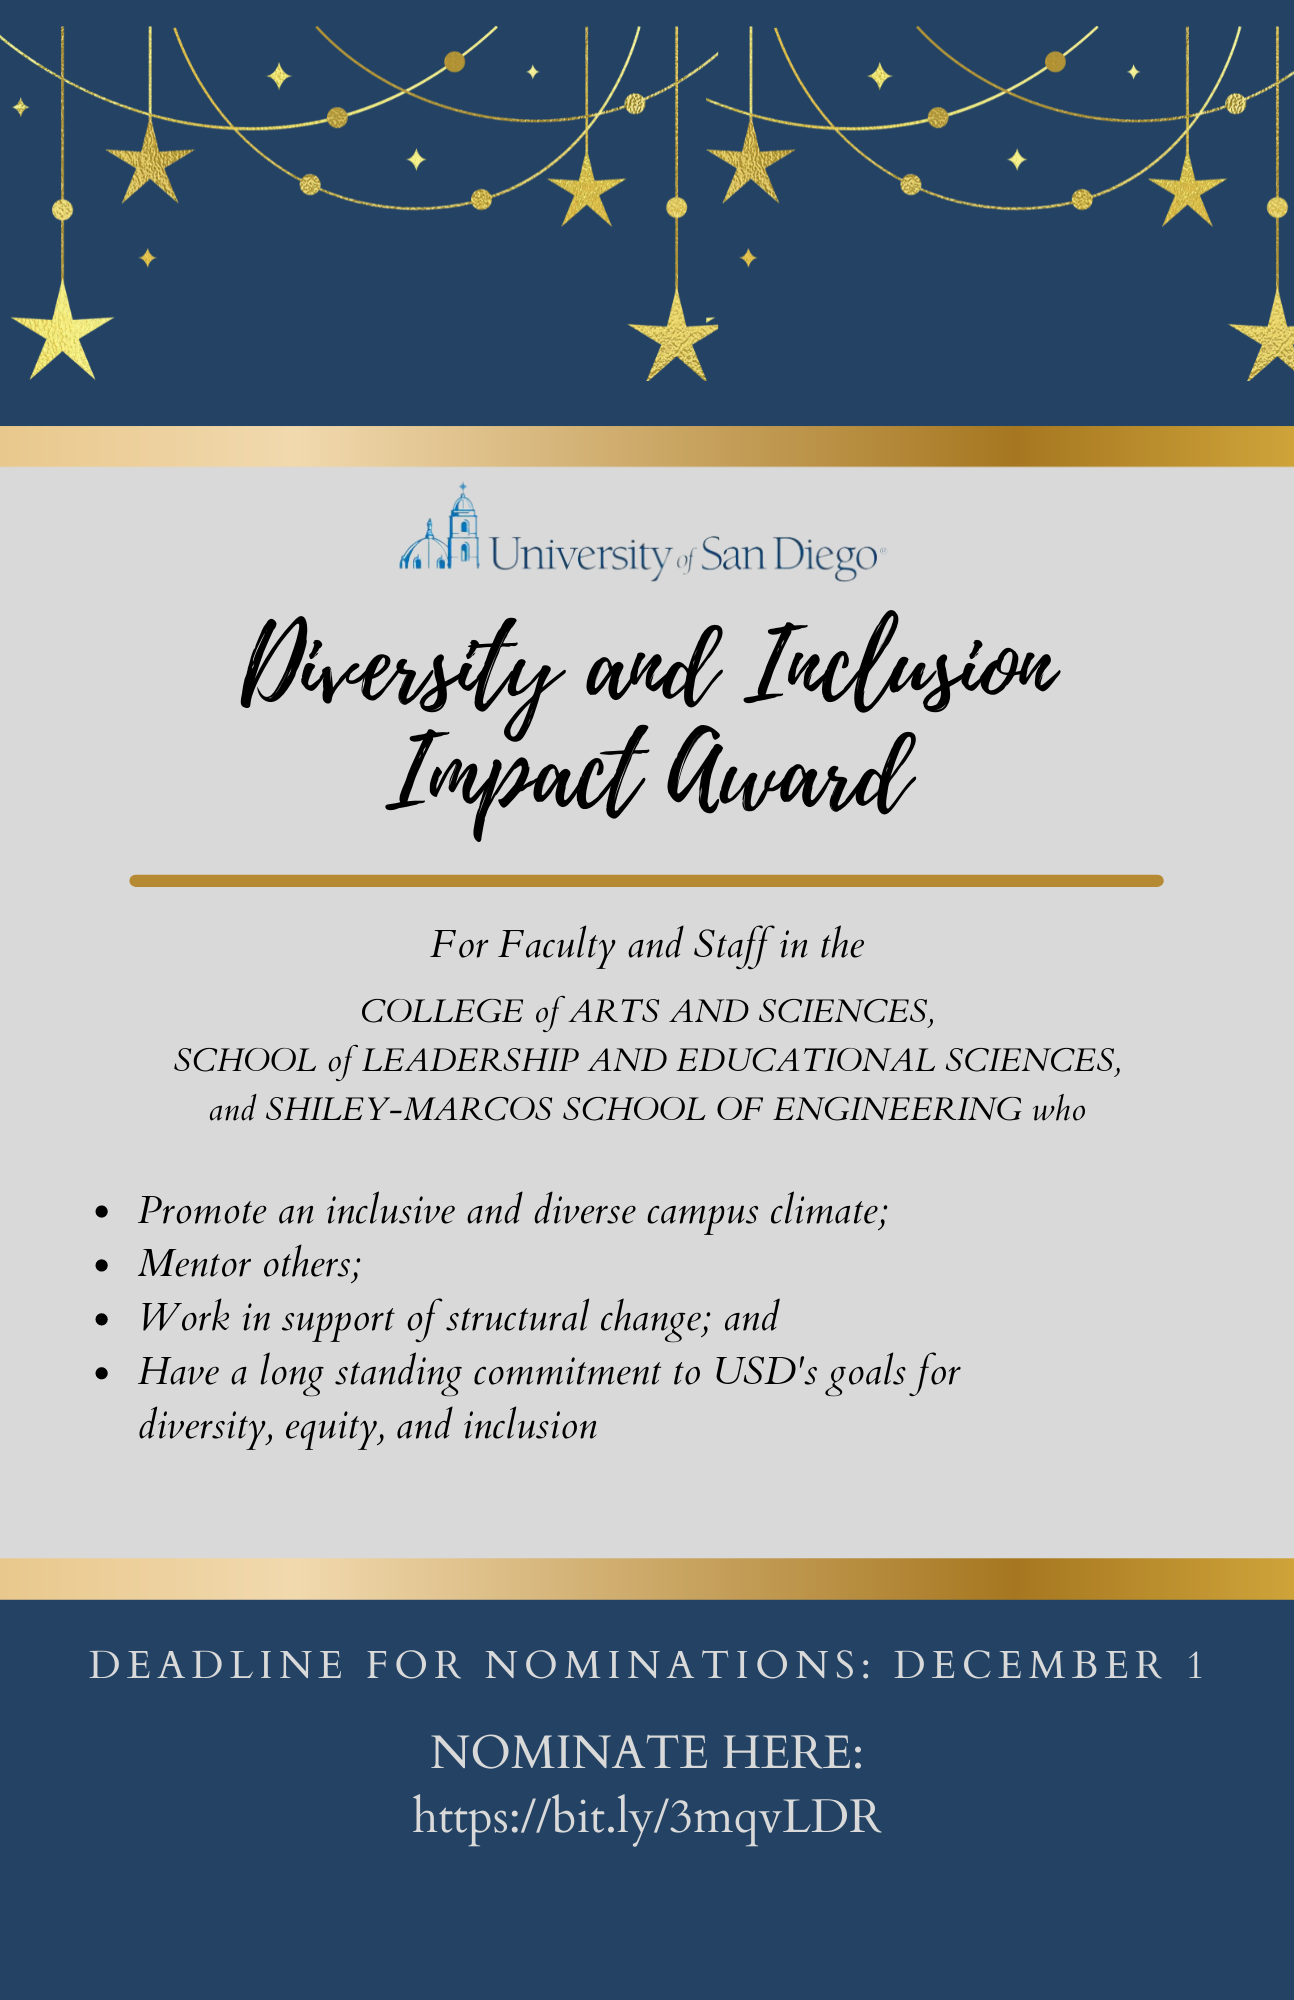 Call for Nominations for the Diversity and Inclusion Impact Award ; Deadline extended to December 1st!